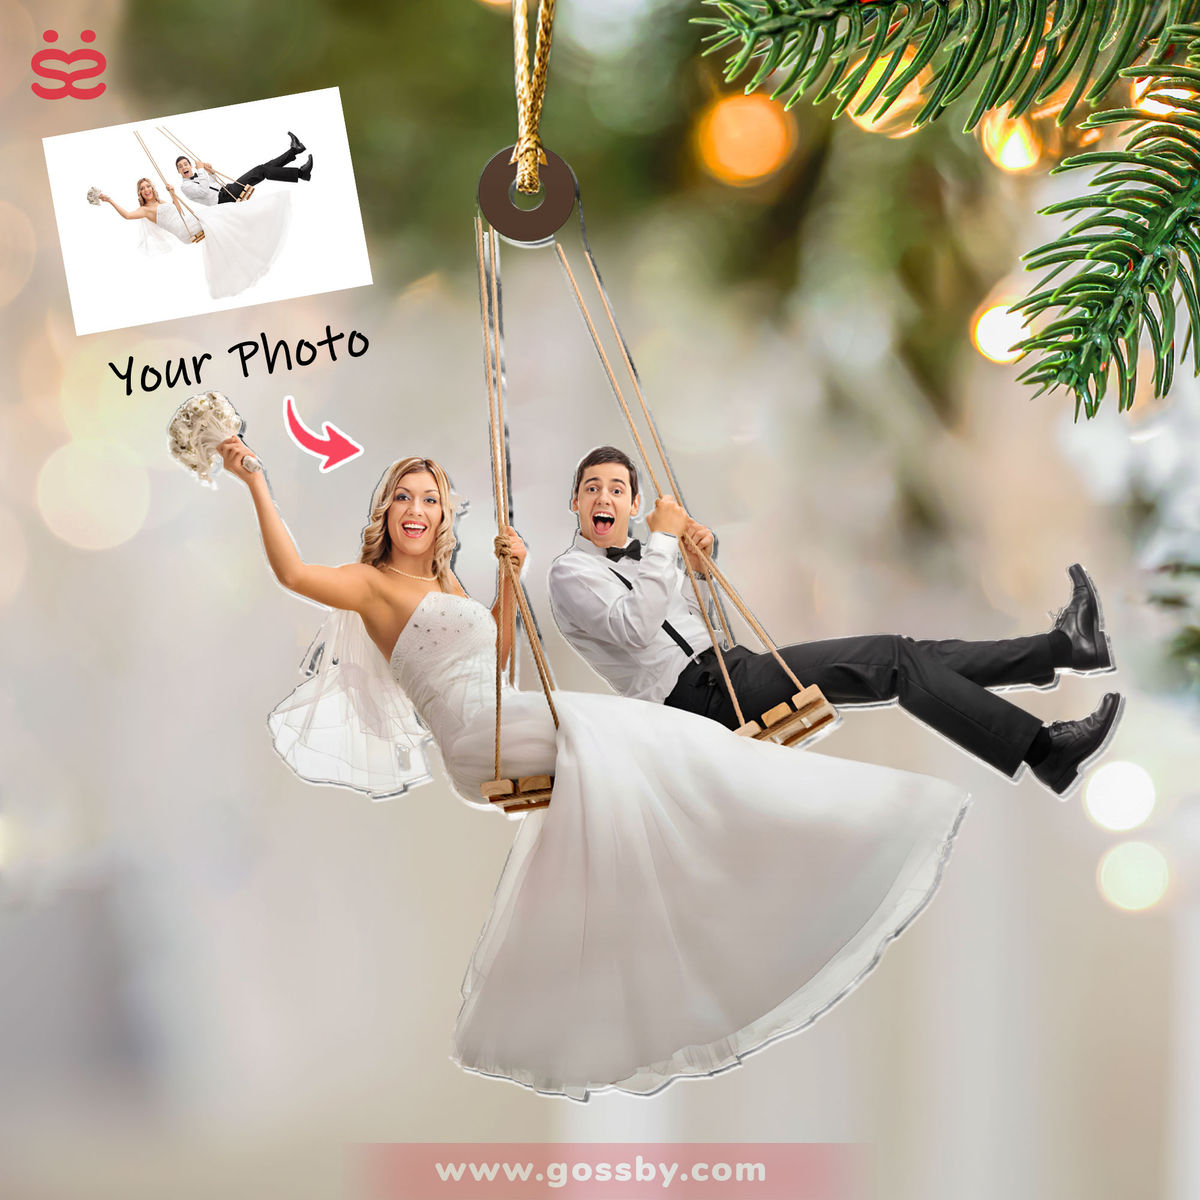 Custom Ornament from Photo - Wedding Gift - Gift for Couple - Couple Photo Gifts